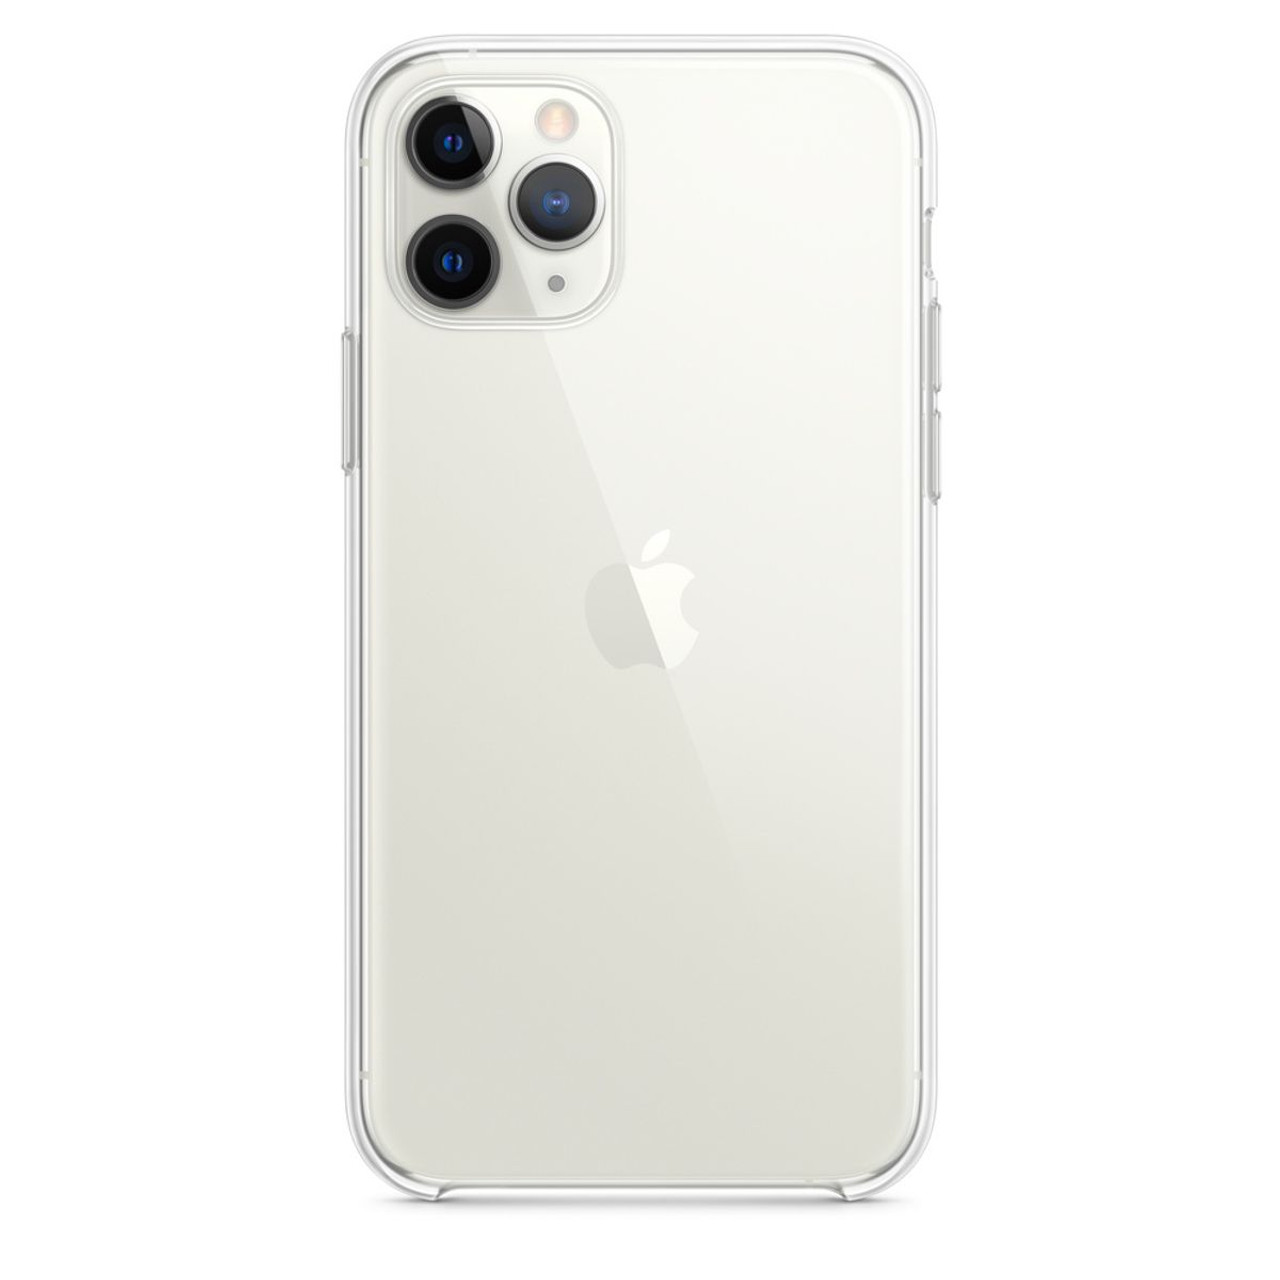 Apple iPhone 11 Pro Max Case product image